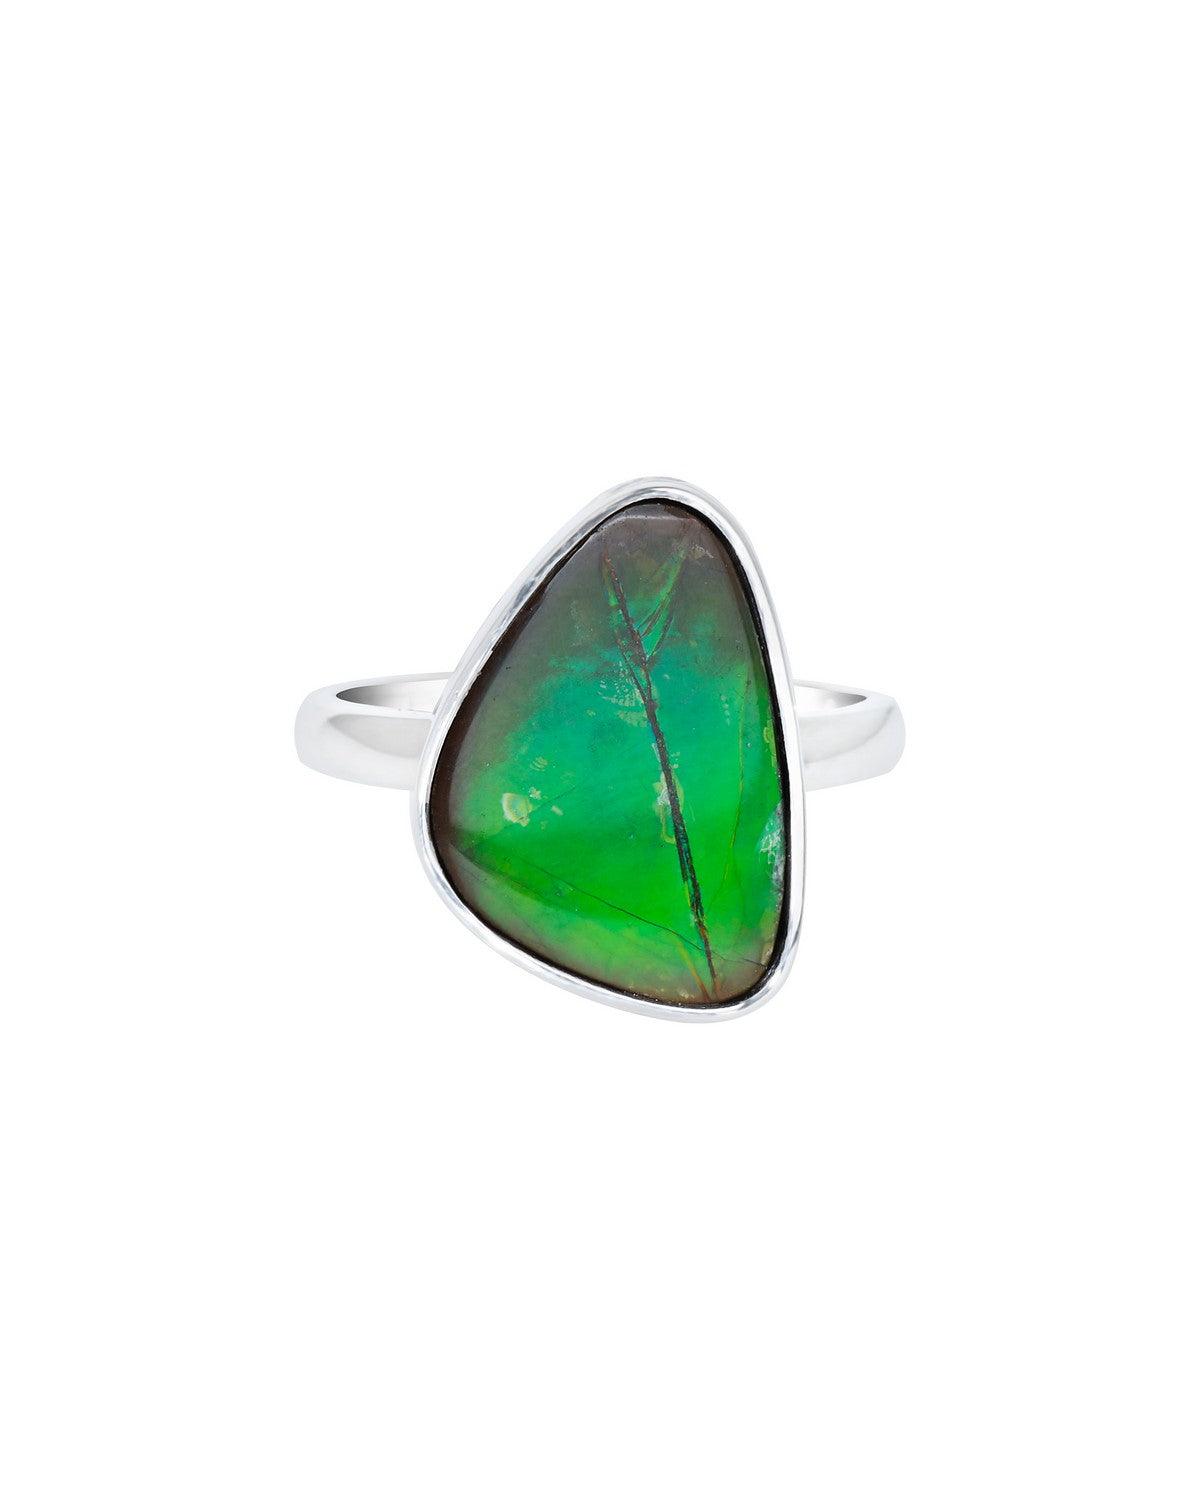 7.55 Ct. Ammolite Solid 925 Sterling Silver Ring Jewelry - YoTreasure